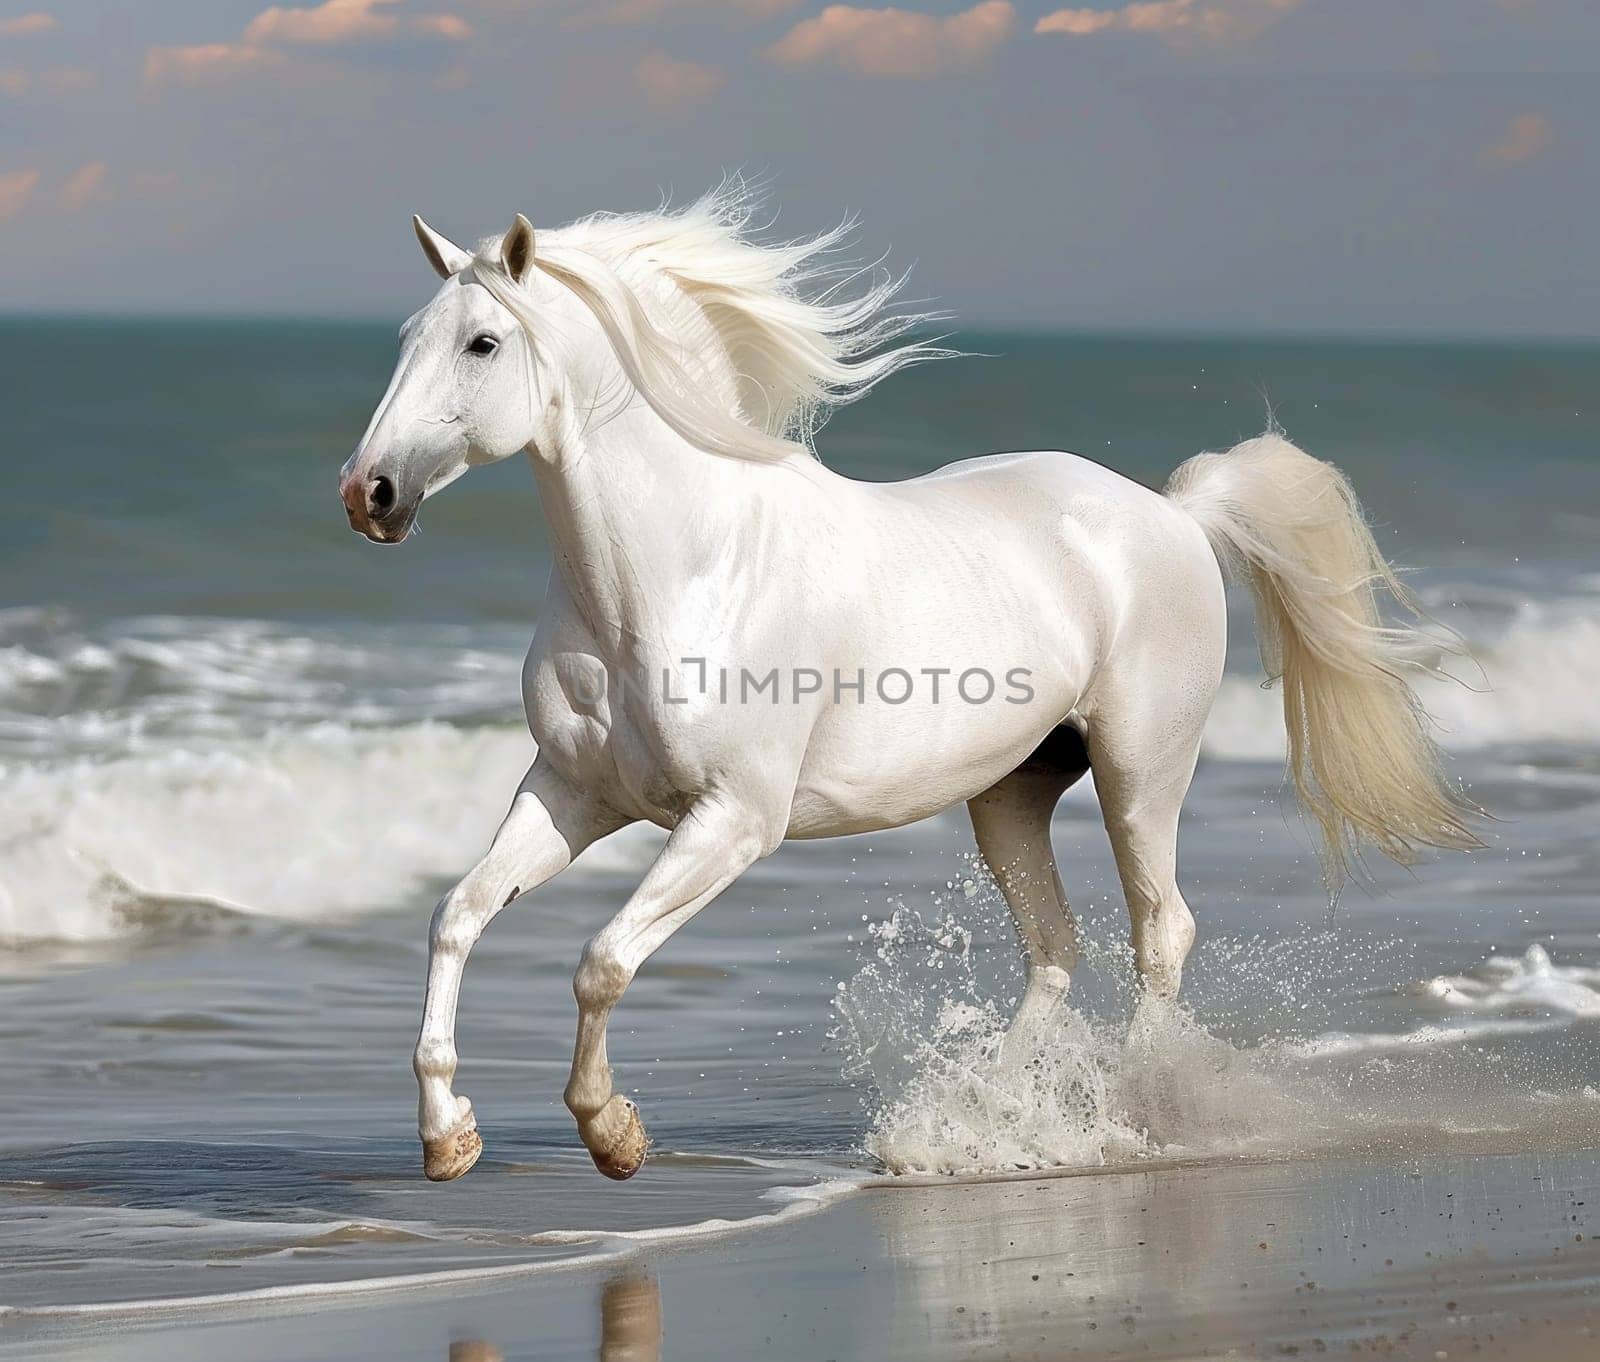 White horse galloping along beach with stunning water view in background perfect travel escape scene